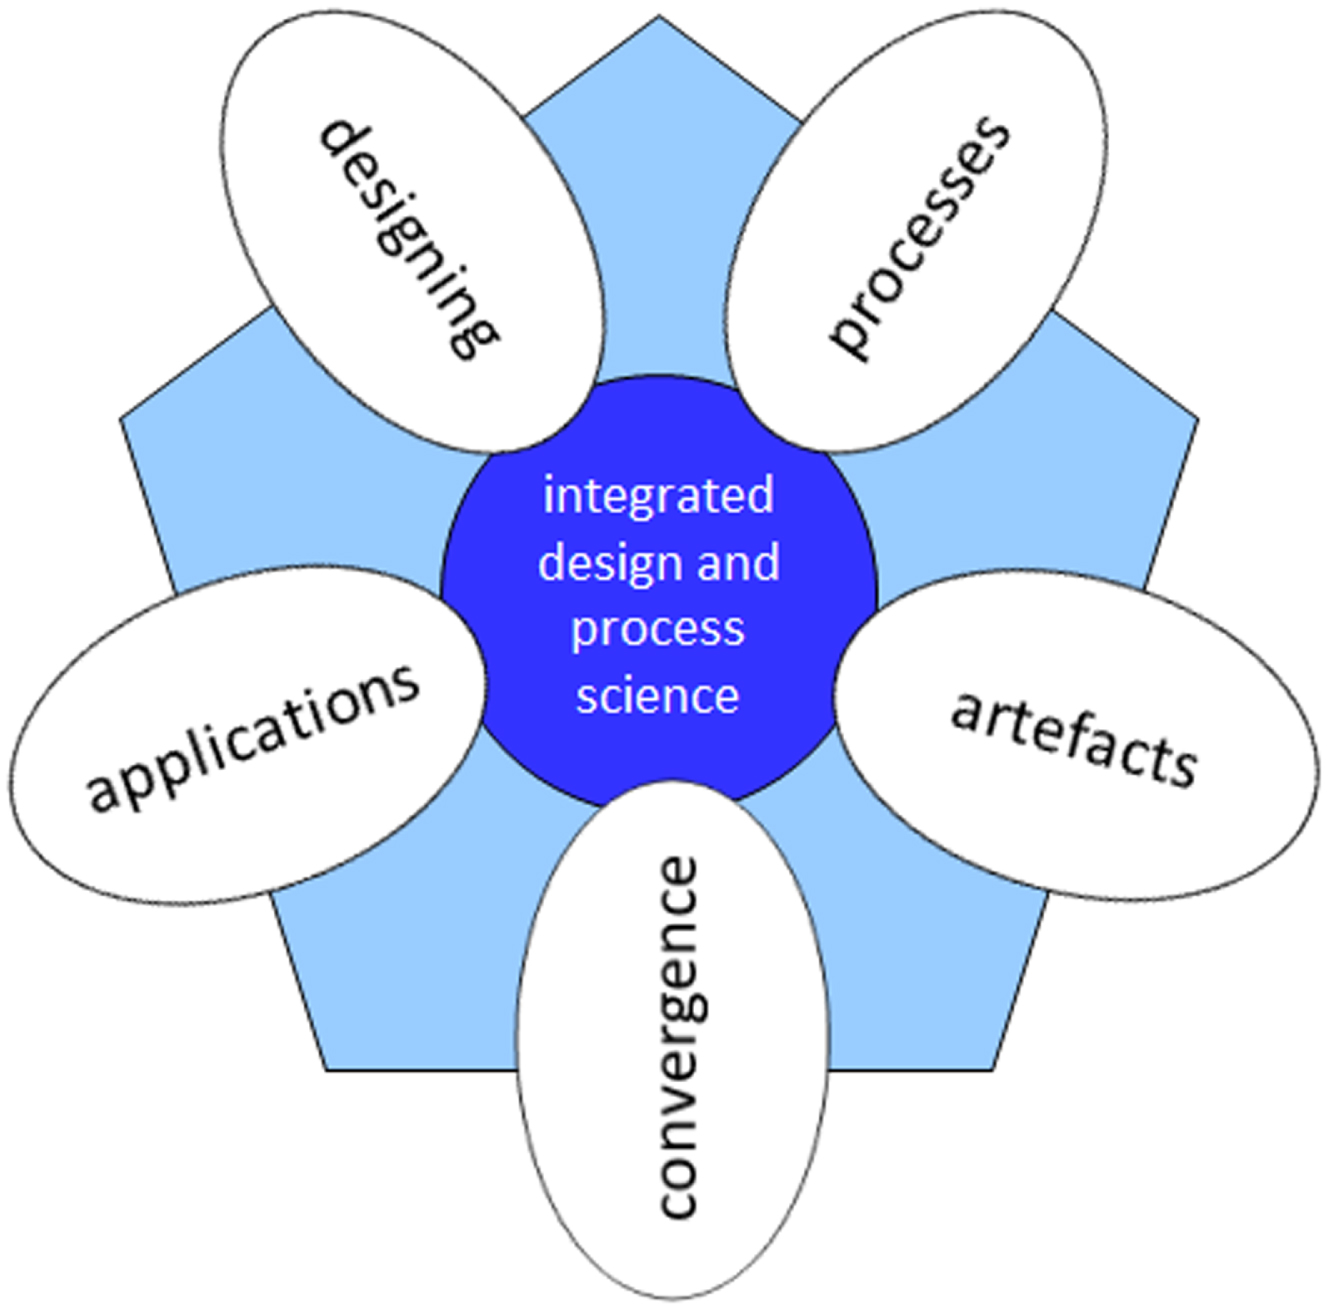 The domains of interest identified by the mission statement (Horváth, 2021).